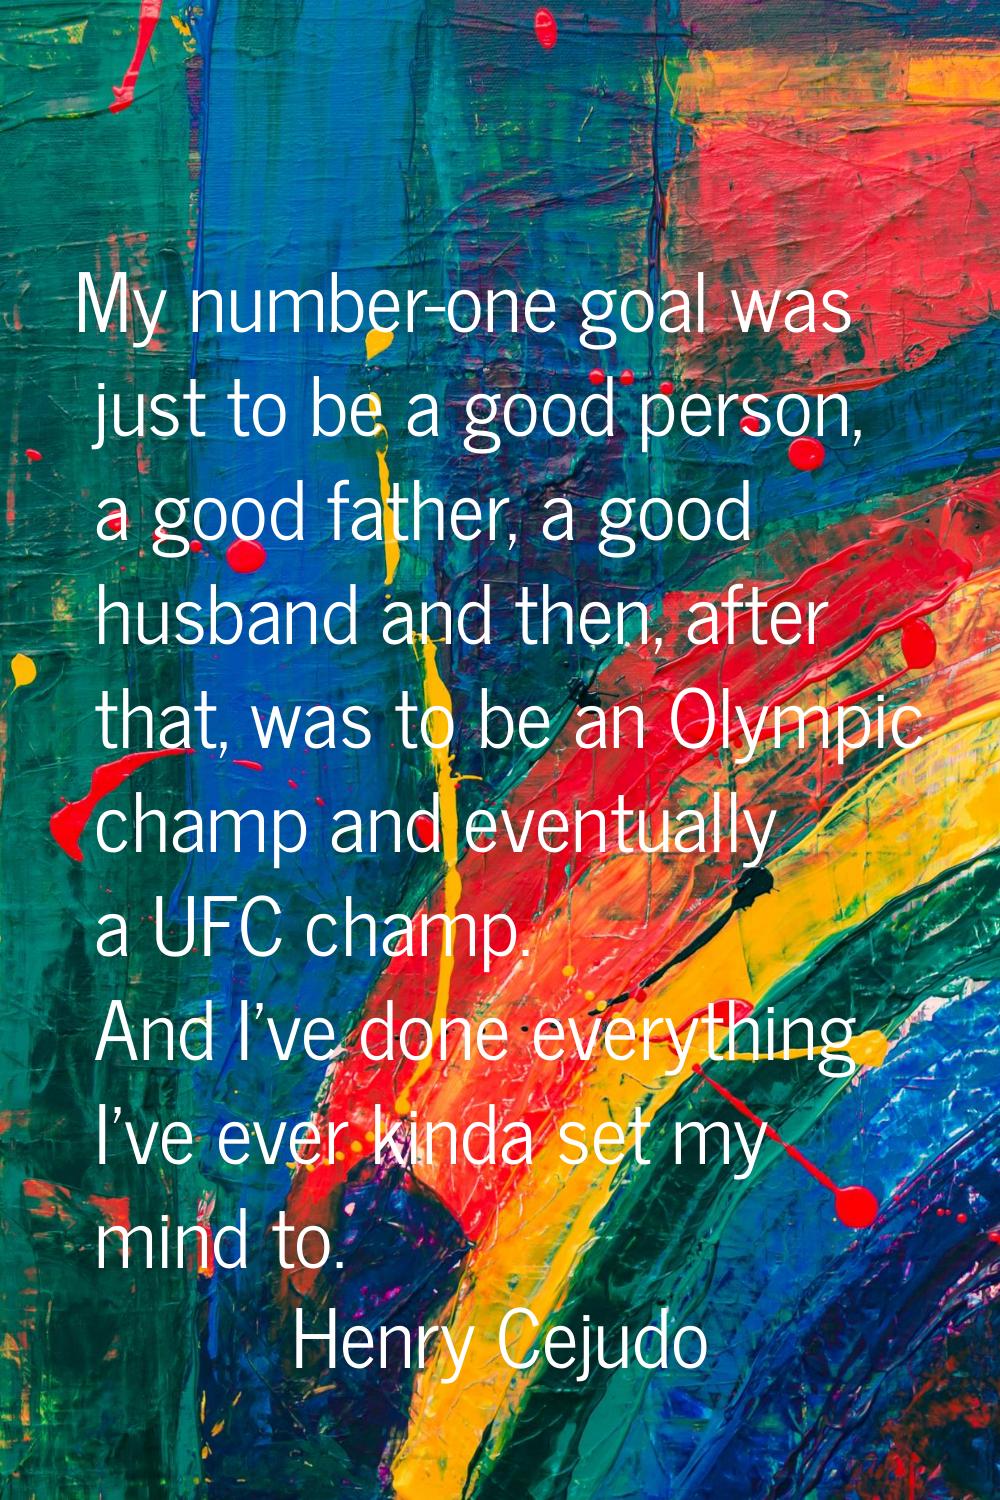 My number-one goal was just to be a good person, a good father, a good husband and then, after that